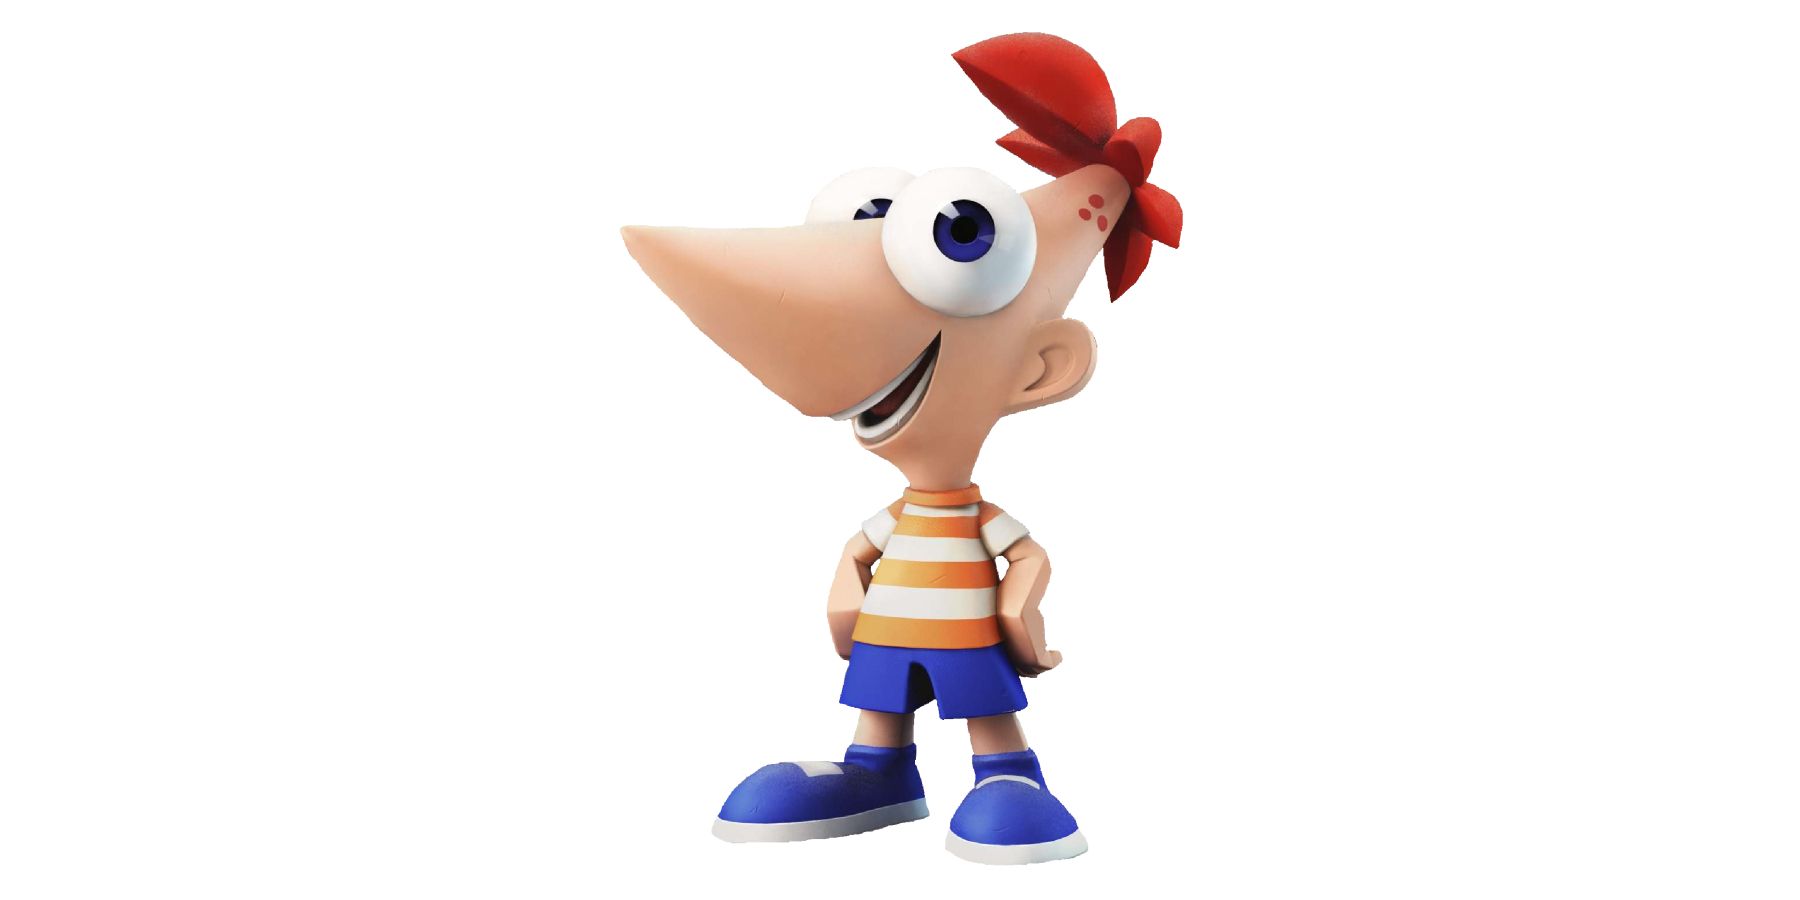 Official render for Phineas character model for Disney Infinity